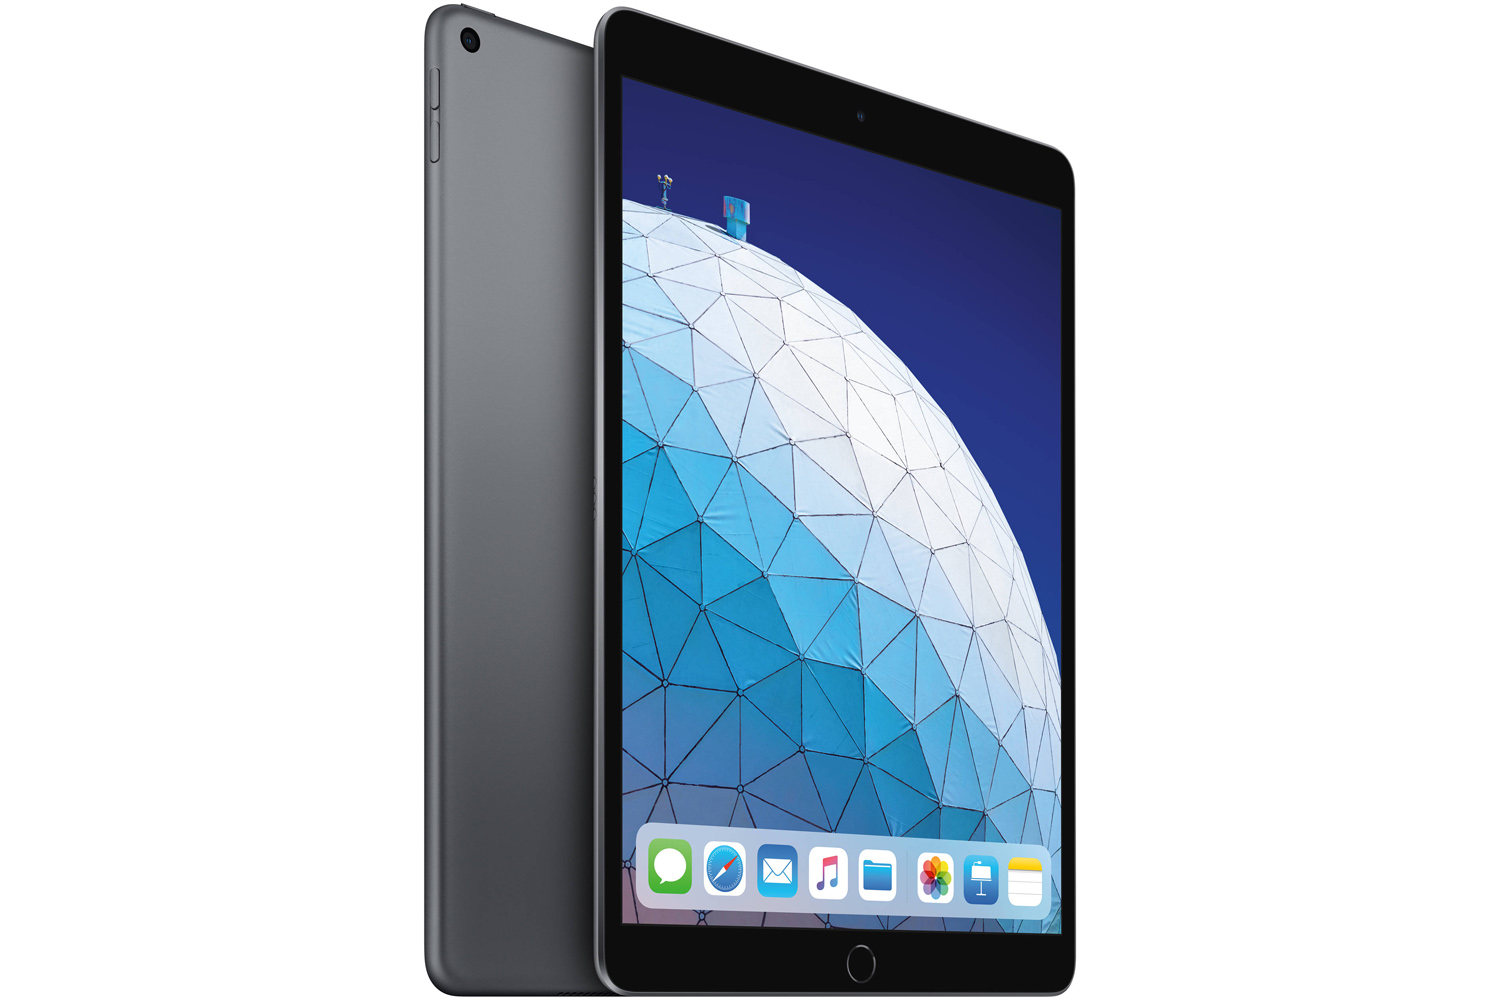 Corporate, government and education supplier for New Zealand - Apple iPad 2017 from The Laptop Company